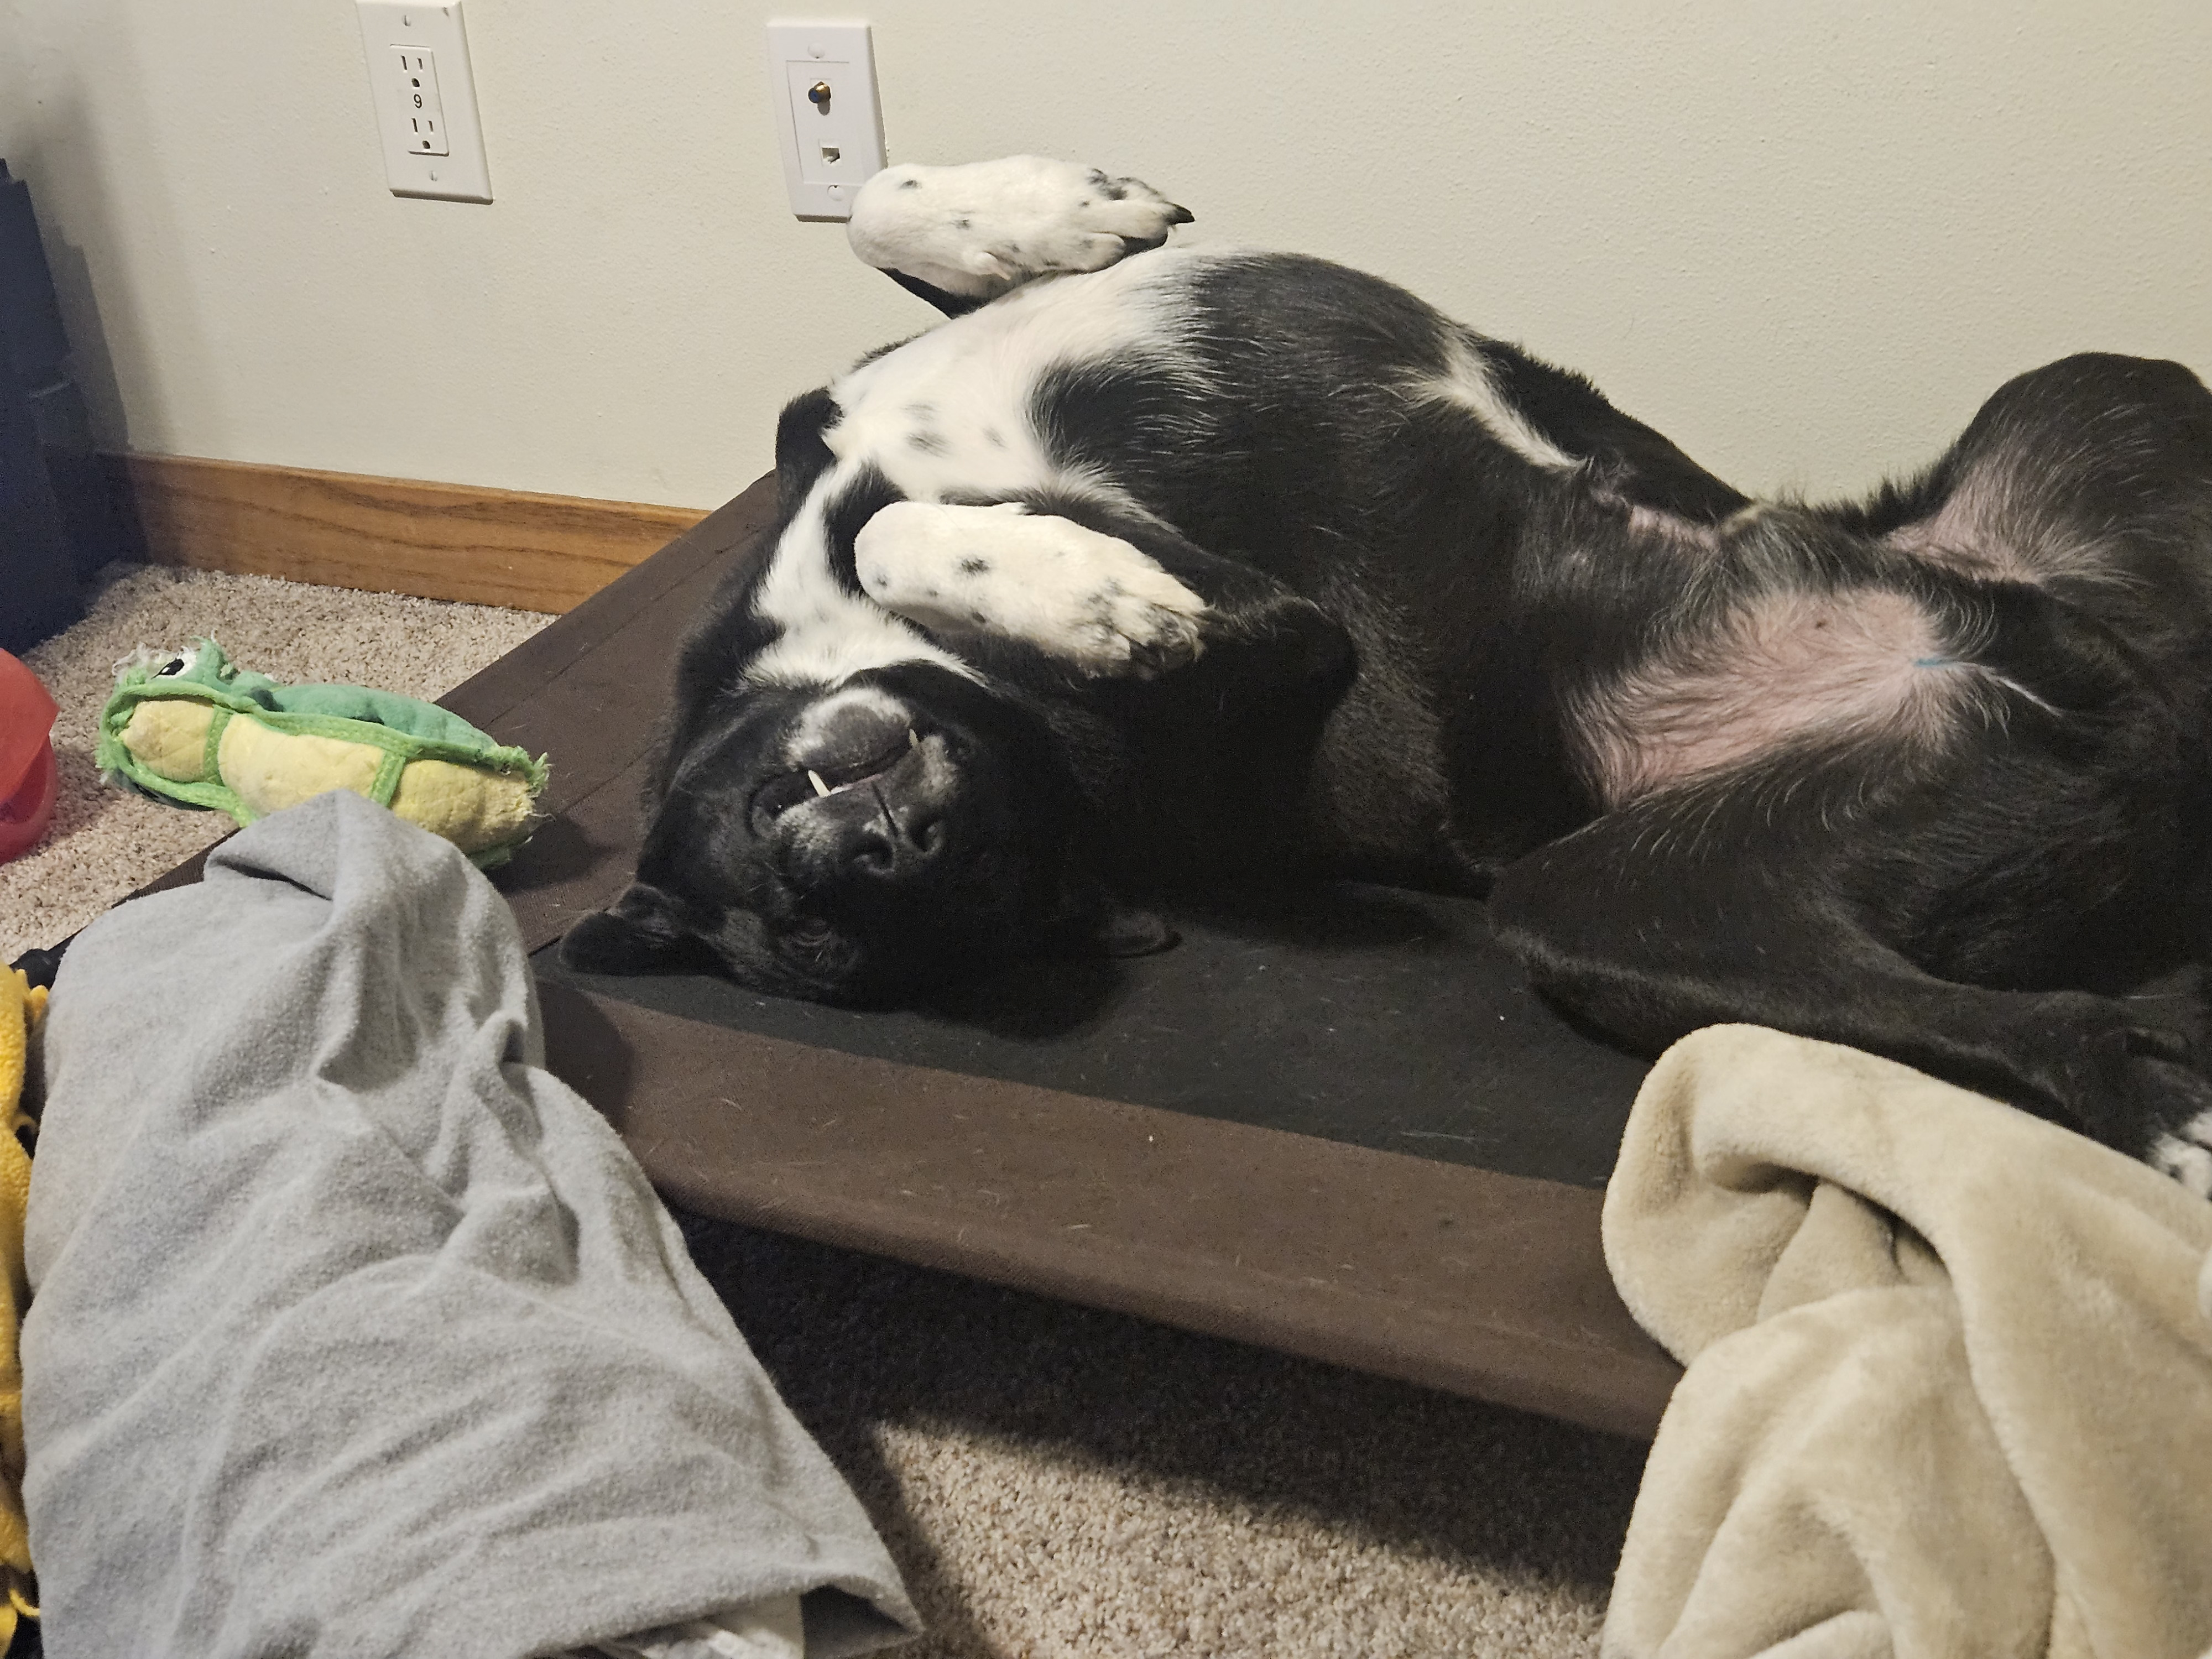 Caspar looking like a derp, laying upside down on his bed